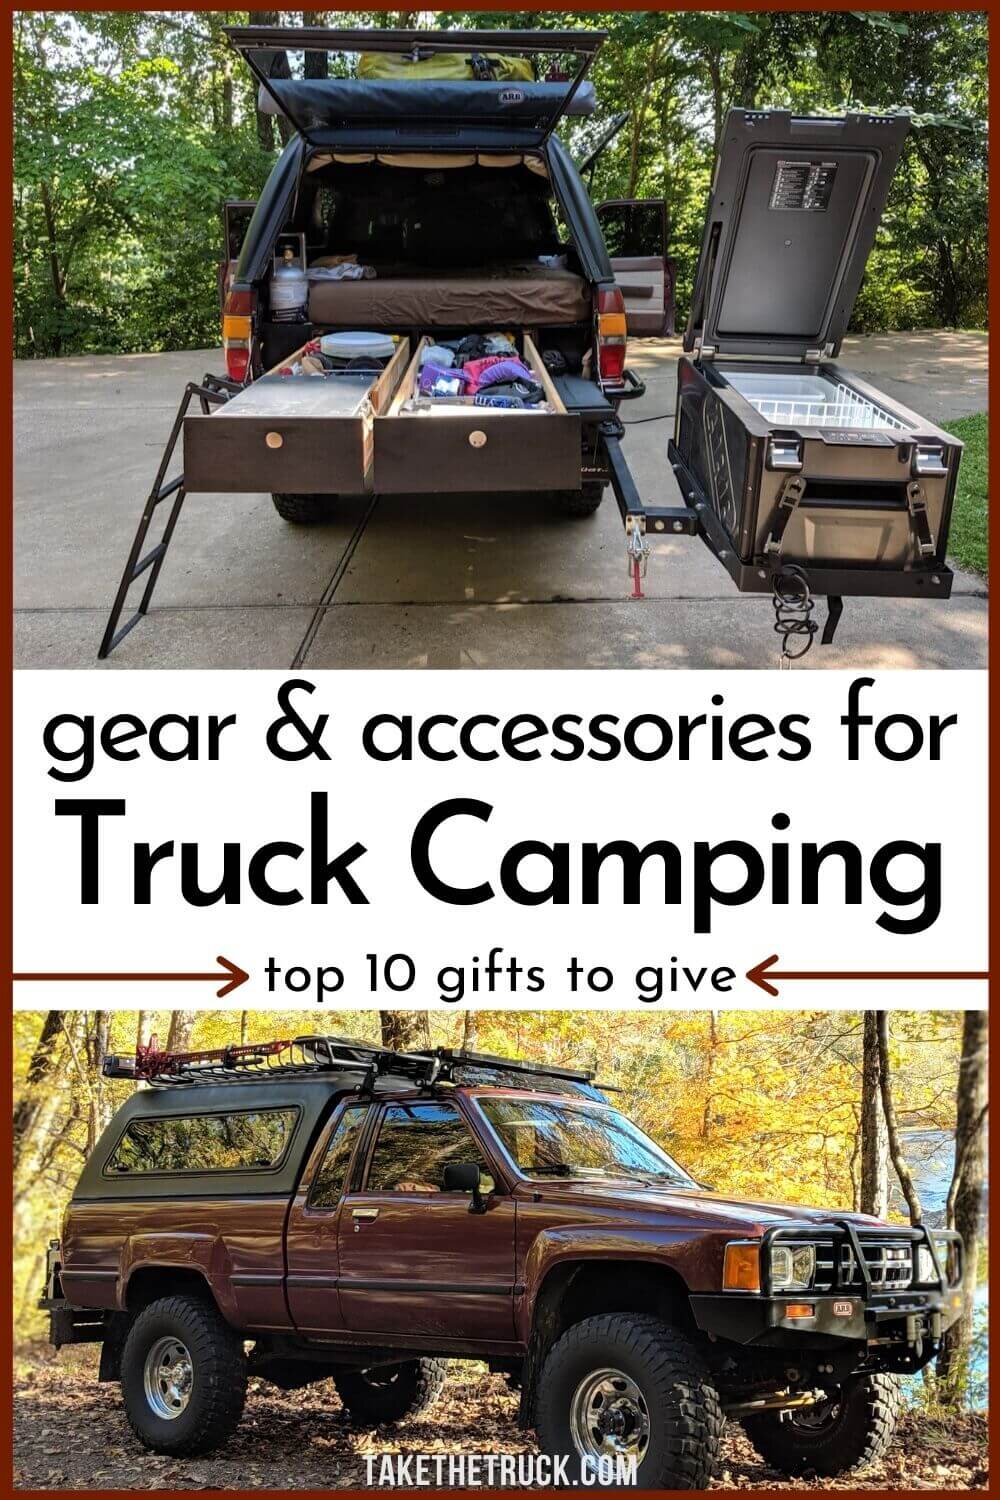 10 great outdoor Christmas gift ideas for camping friends and outdoor lovers-especially for truck bed camping!